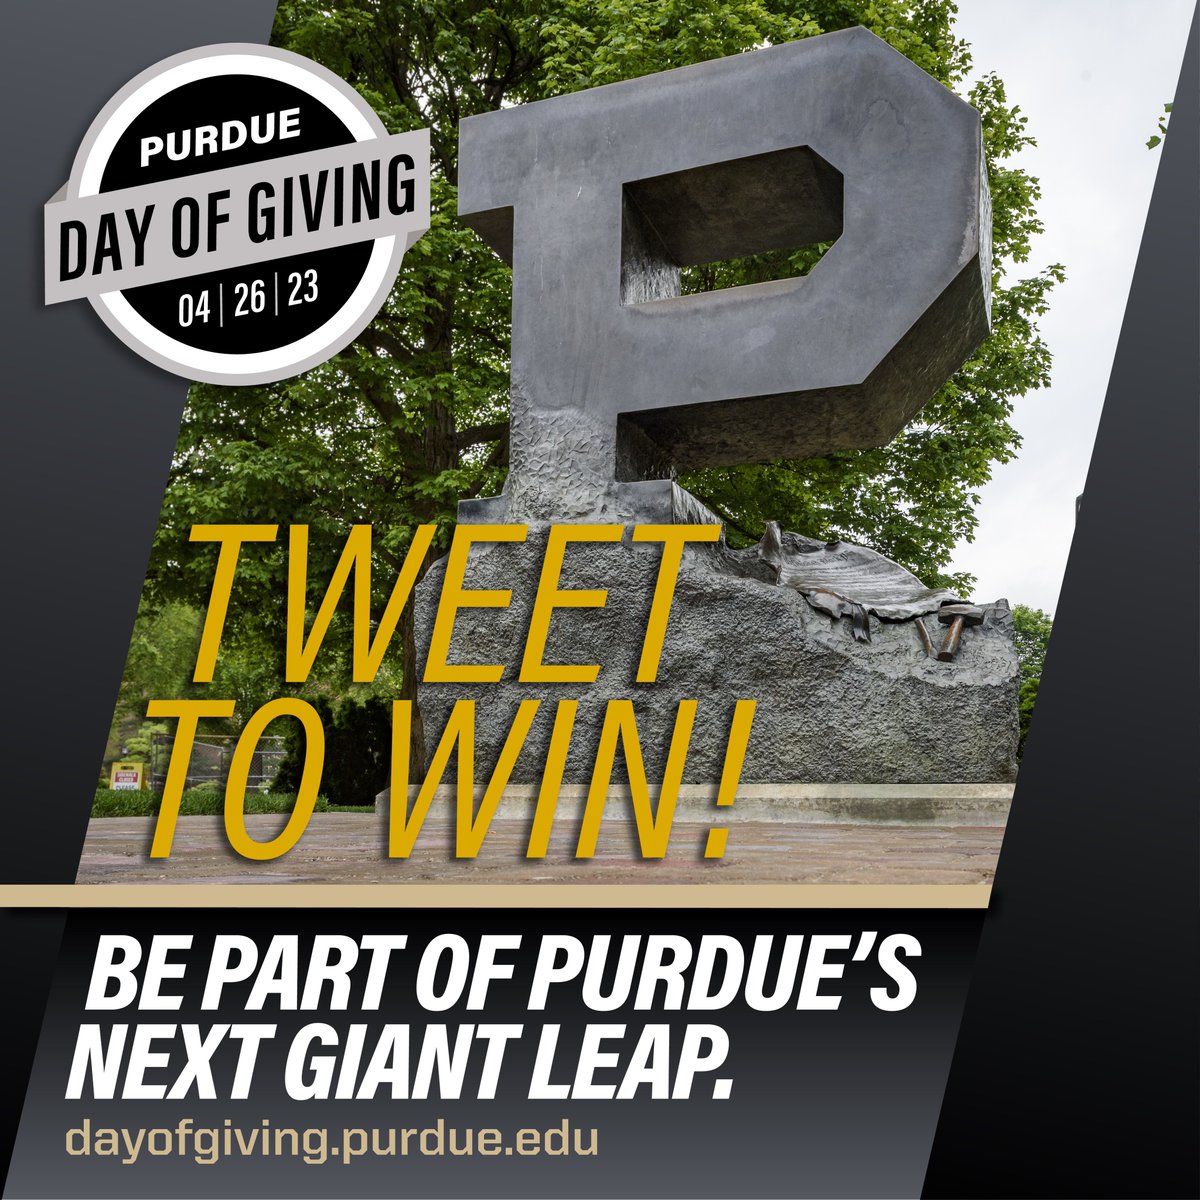 Don’t miss out! The 50th original tweet this hour using your unit handle/hashtag and #PurdueDayofGiving wins $500 in bonus funds!